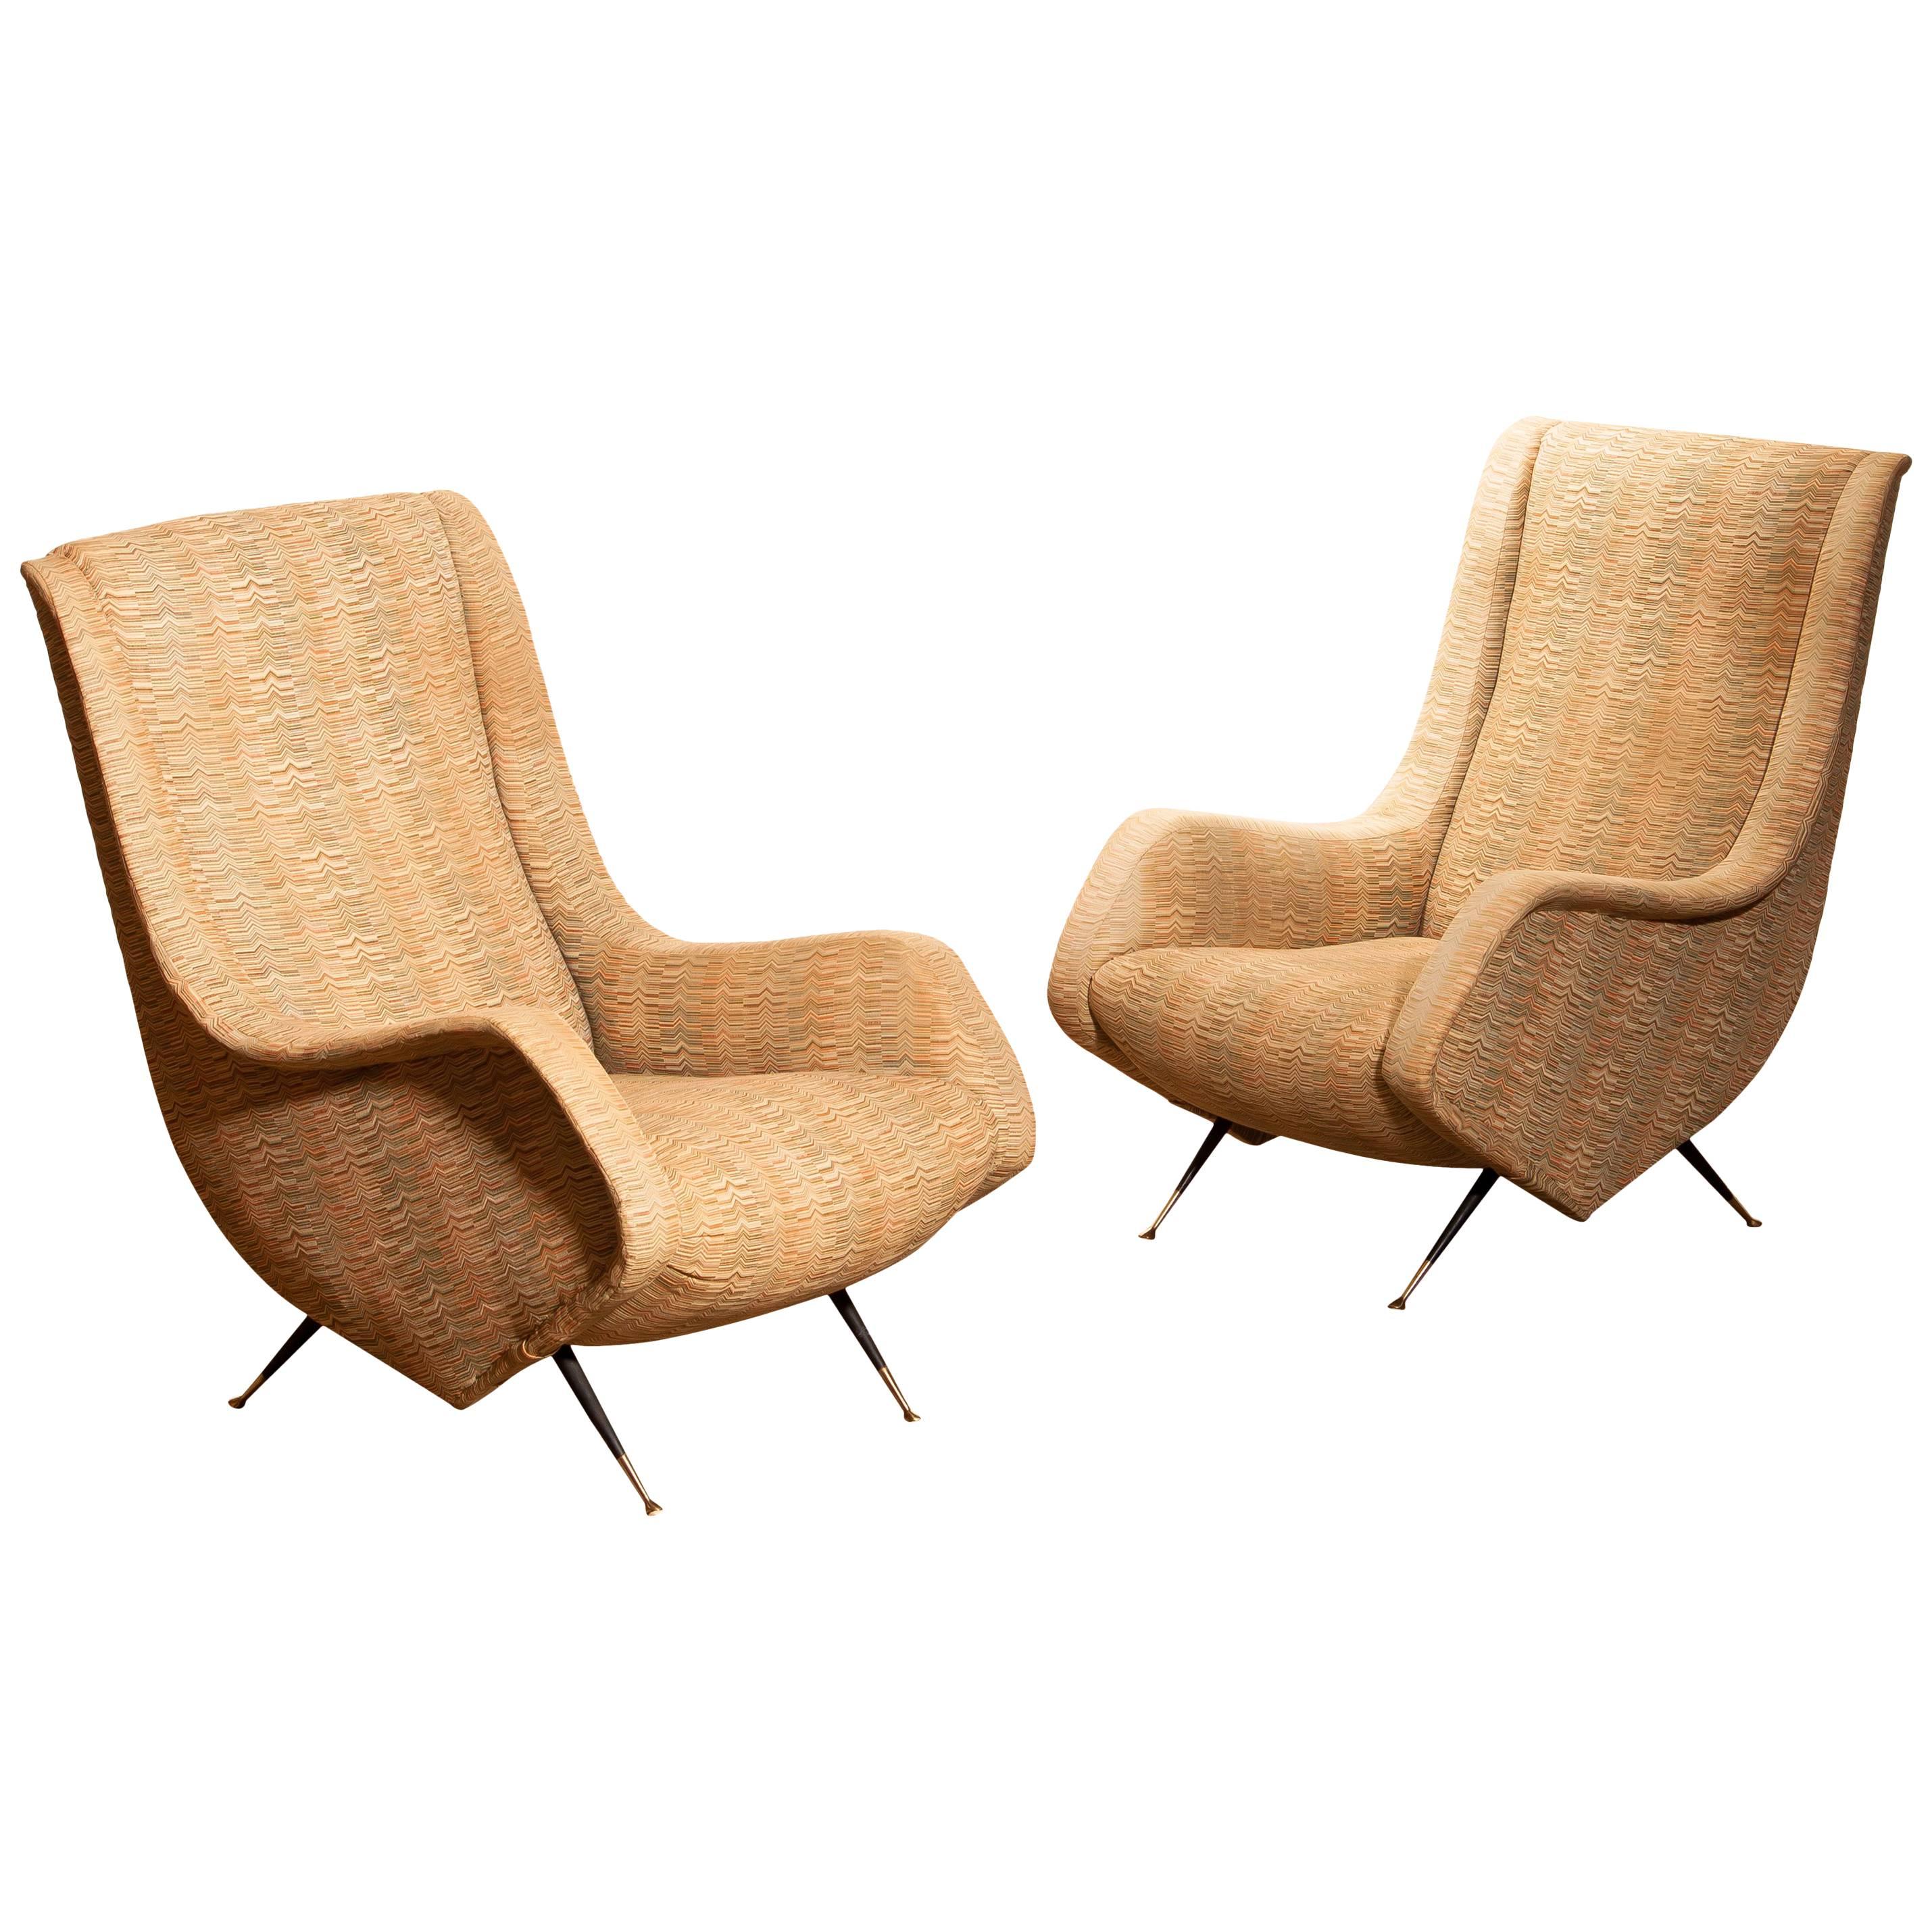 Set of Two Original Easy Chairs from the 1950s by Aldo Morbelli for Isa Bergamo